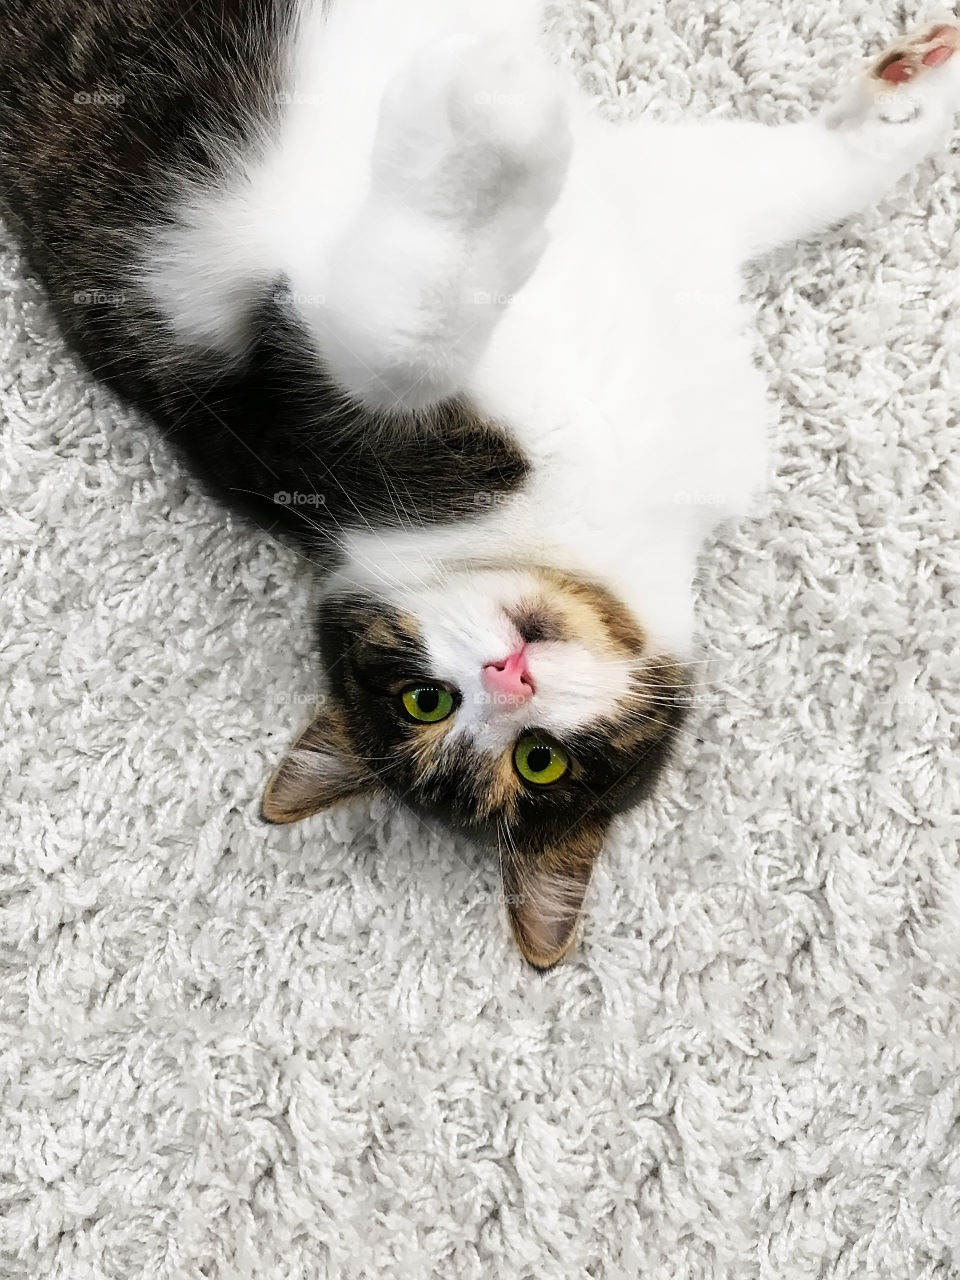 Cute cat with green eyes on white carpet 